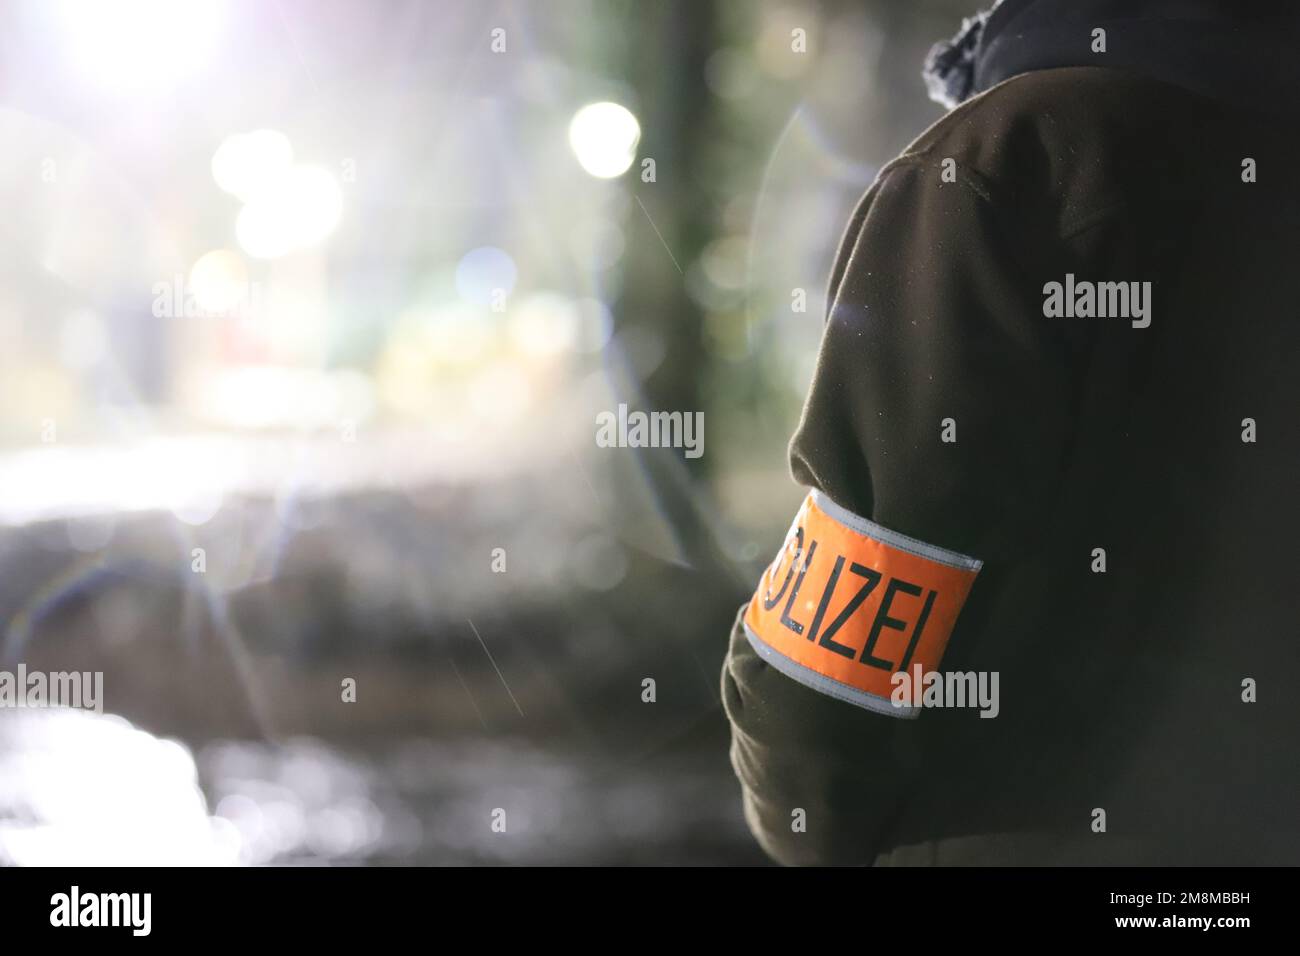 photography Alamy stock and - hi-res images Police armband